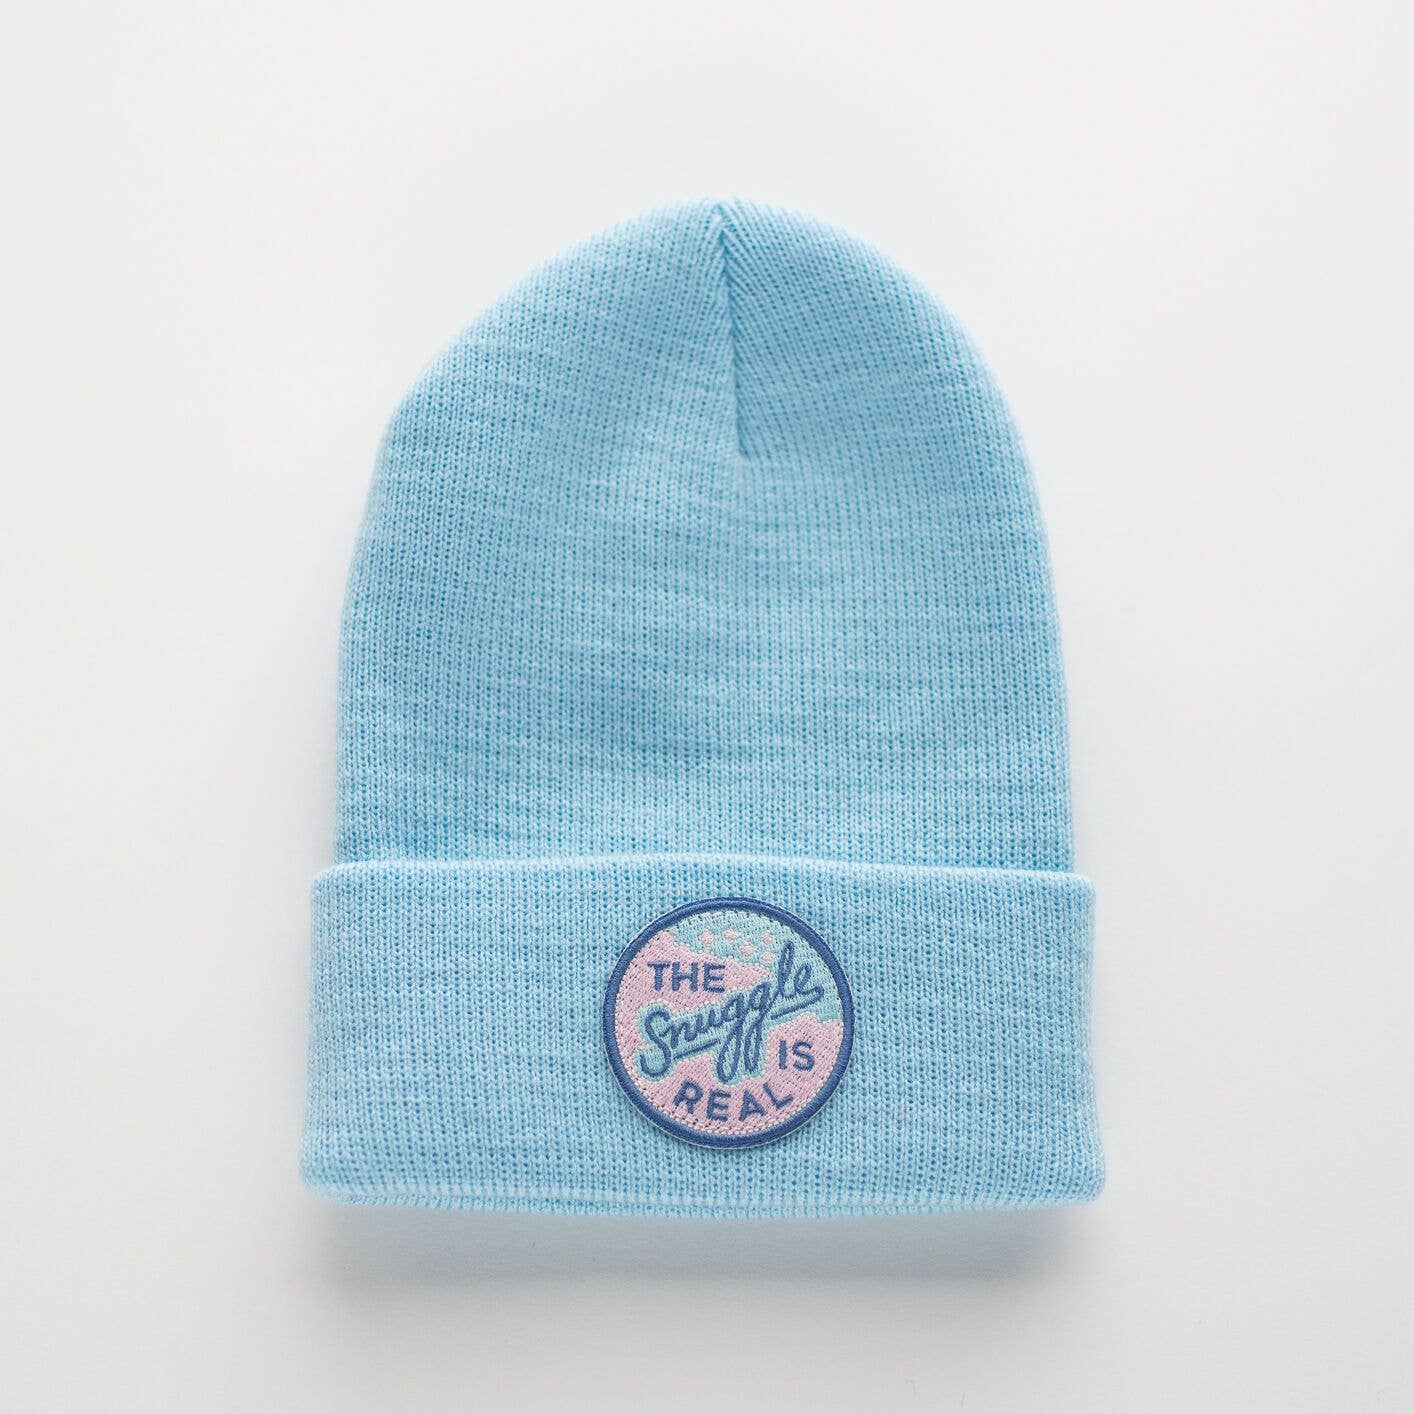 The Snuggle is Real - Kids Beanie